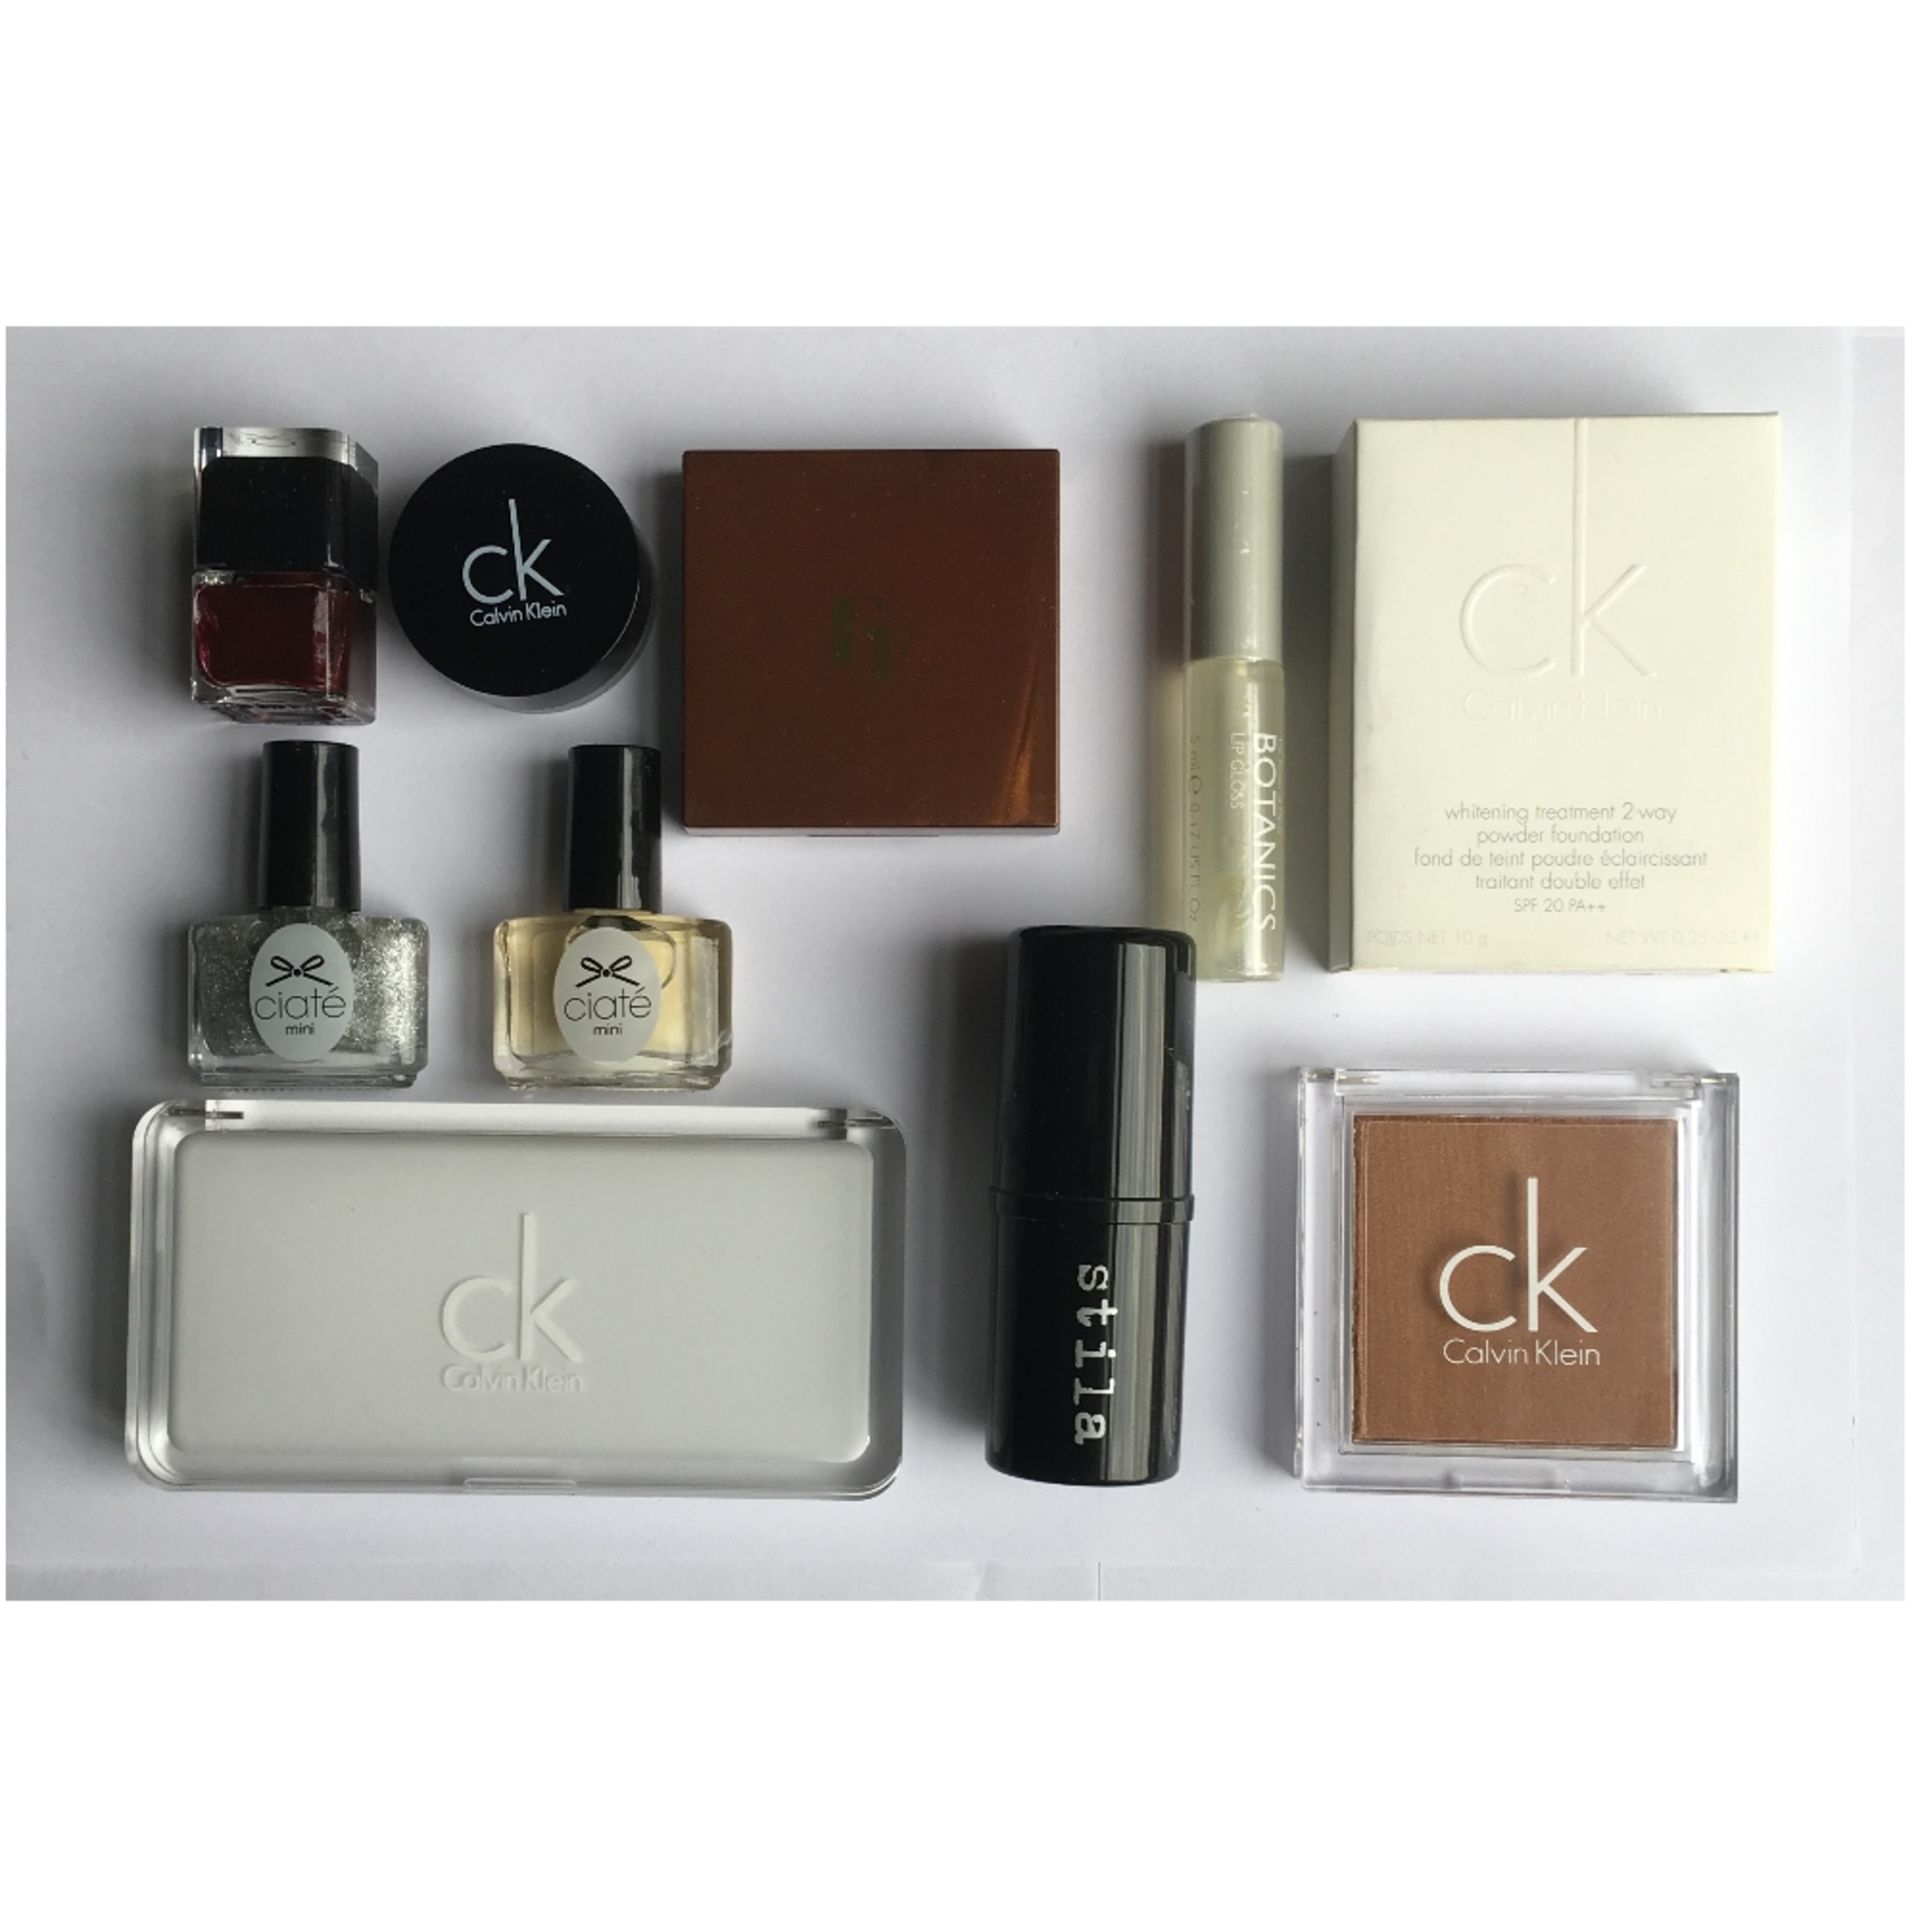 120 x Branded Cosmetics – 12 of each in the picture -NO VATUK Delivery £15